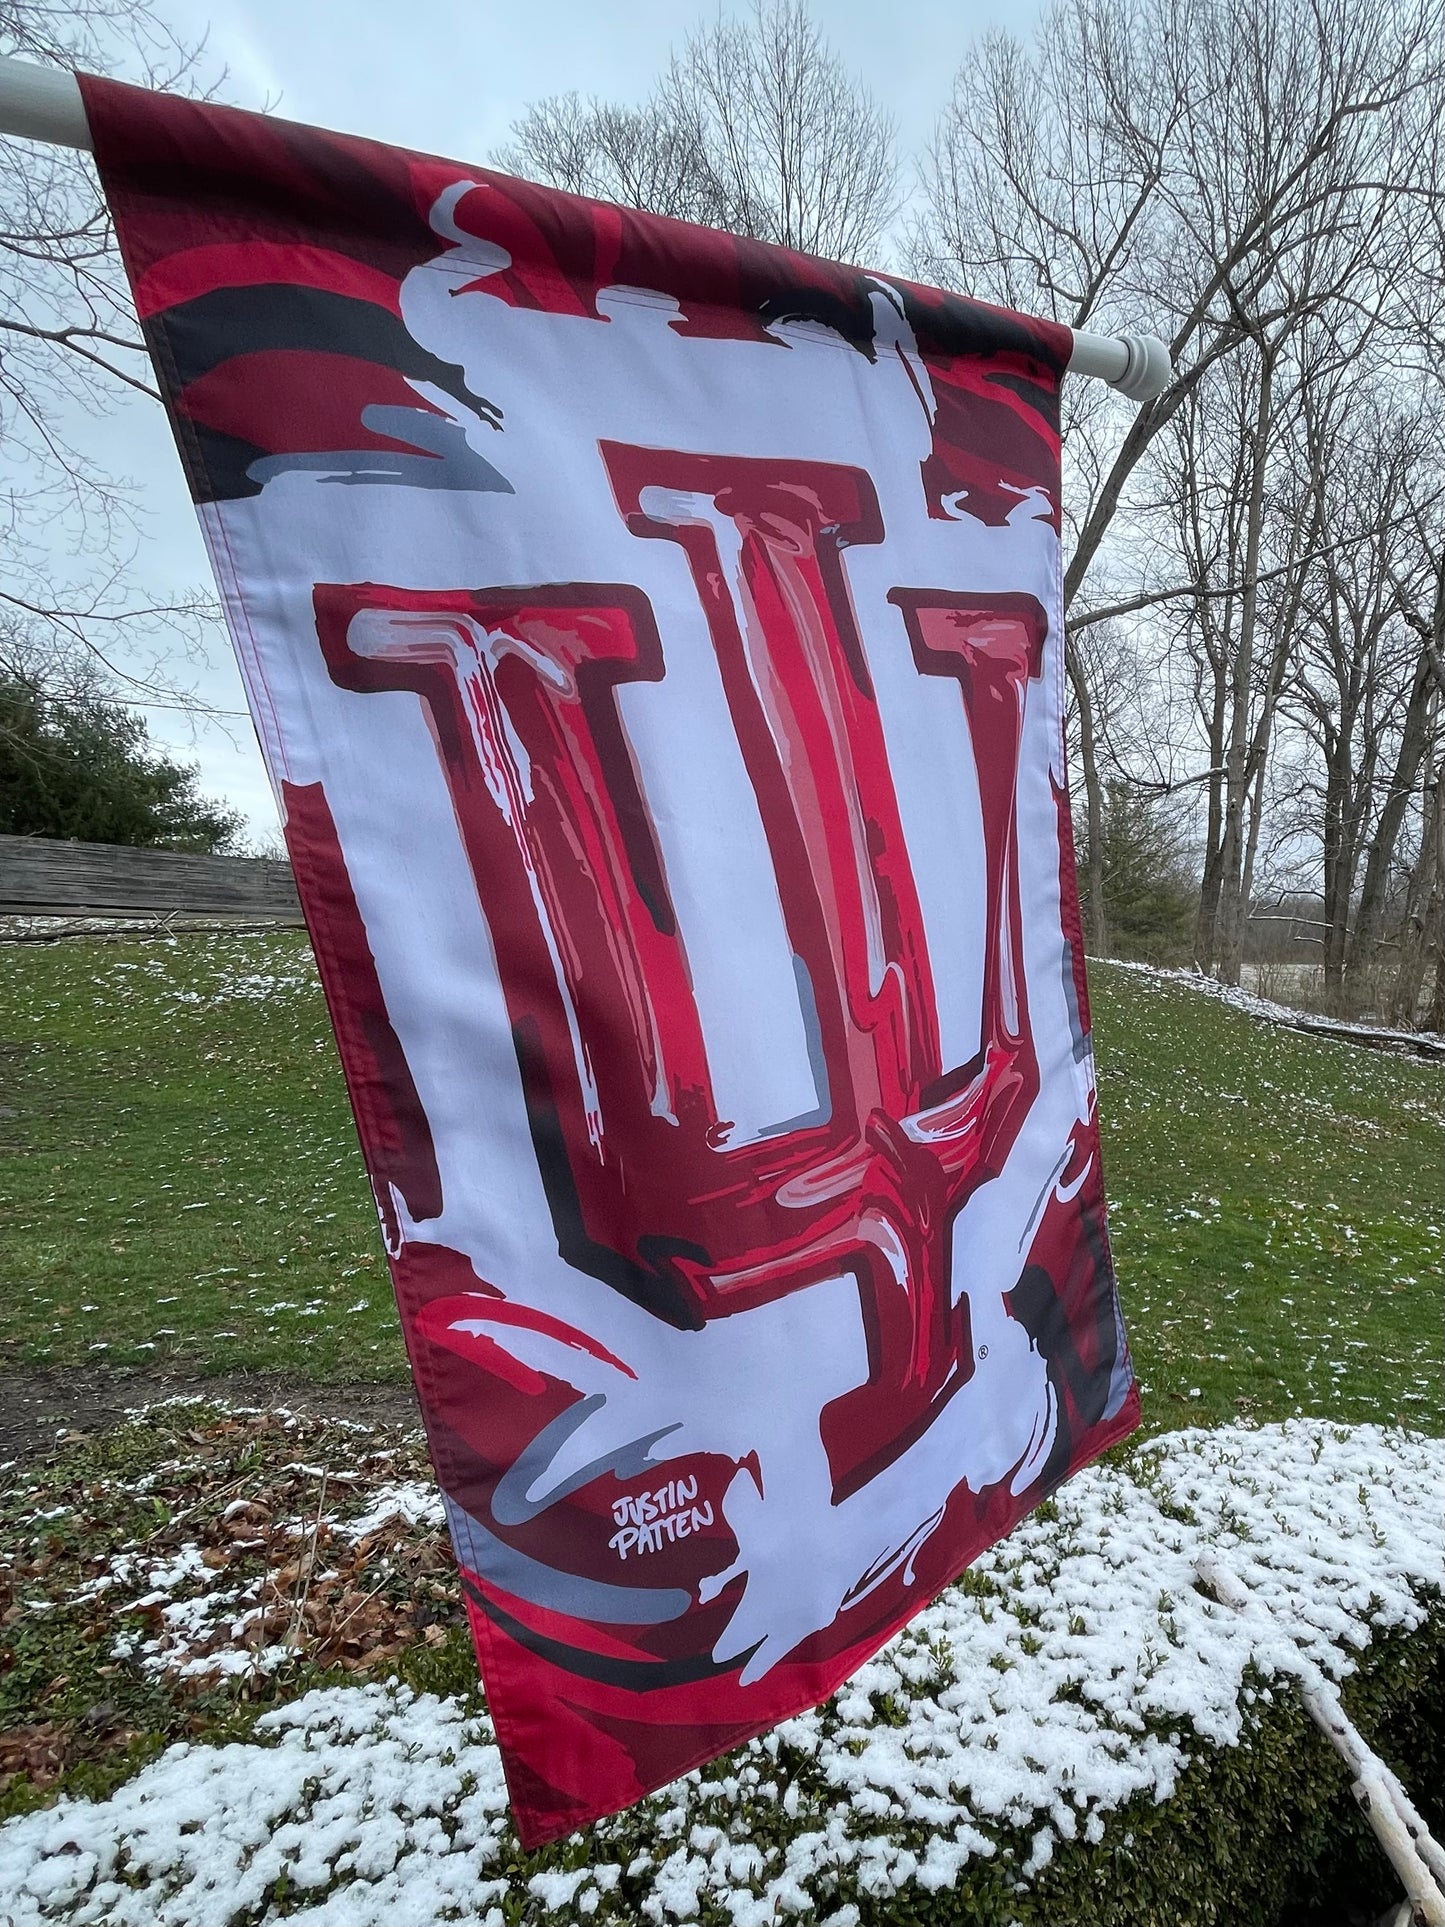 Indiana University IU House Flag by Justin Patten